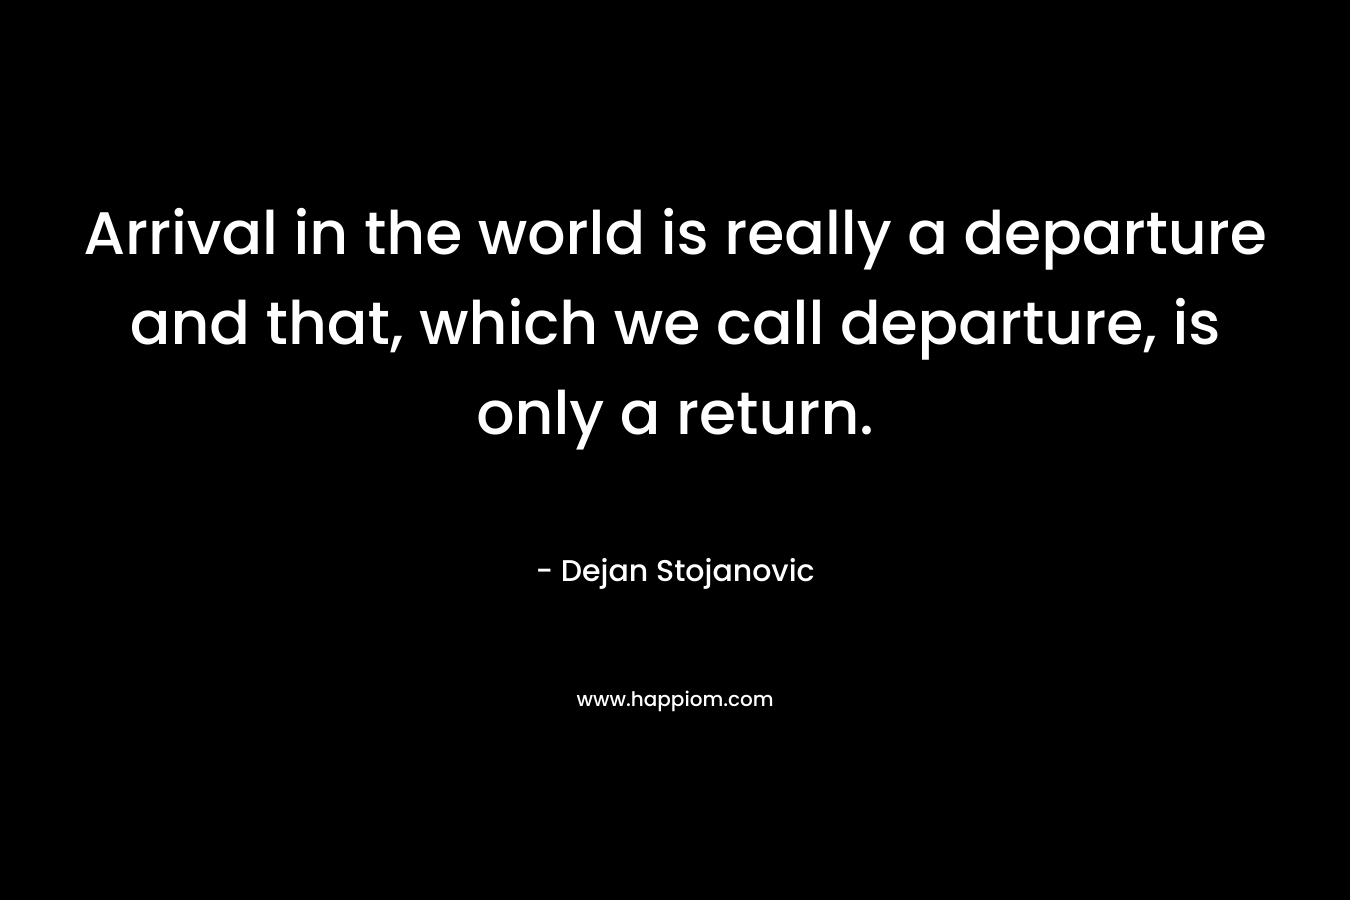 Arrival in the world is really a departure and that, which we call departure, is only a return.